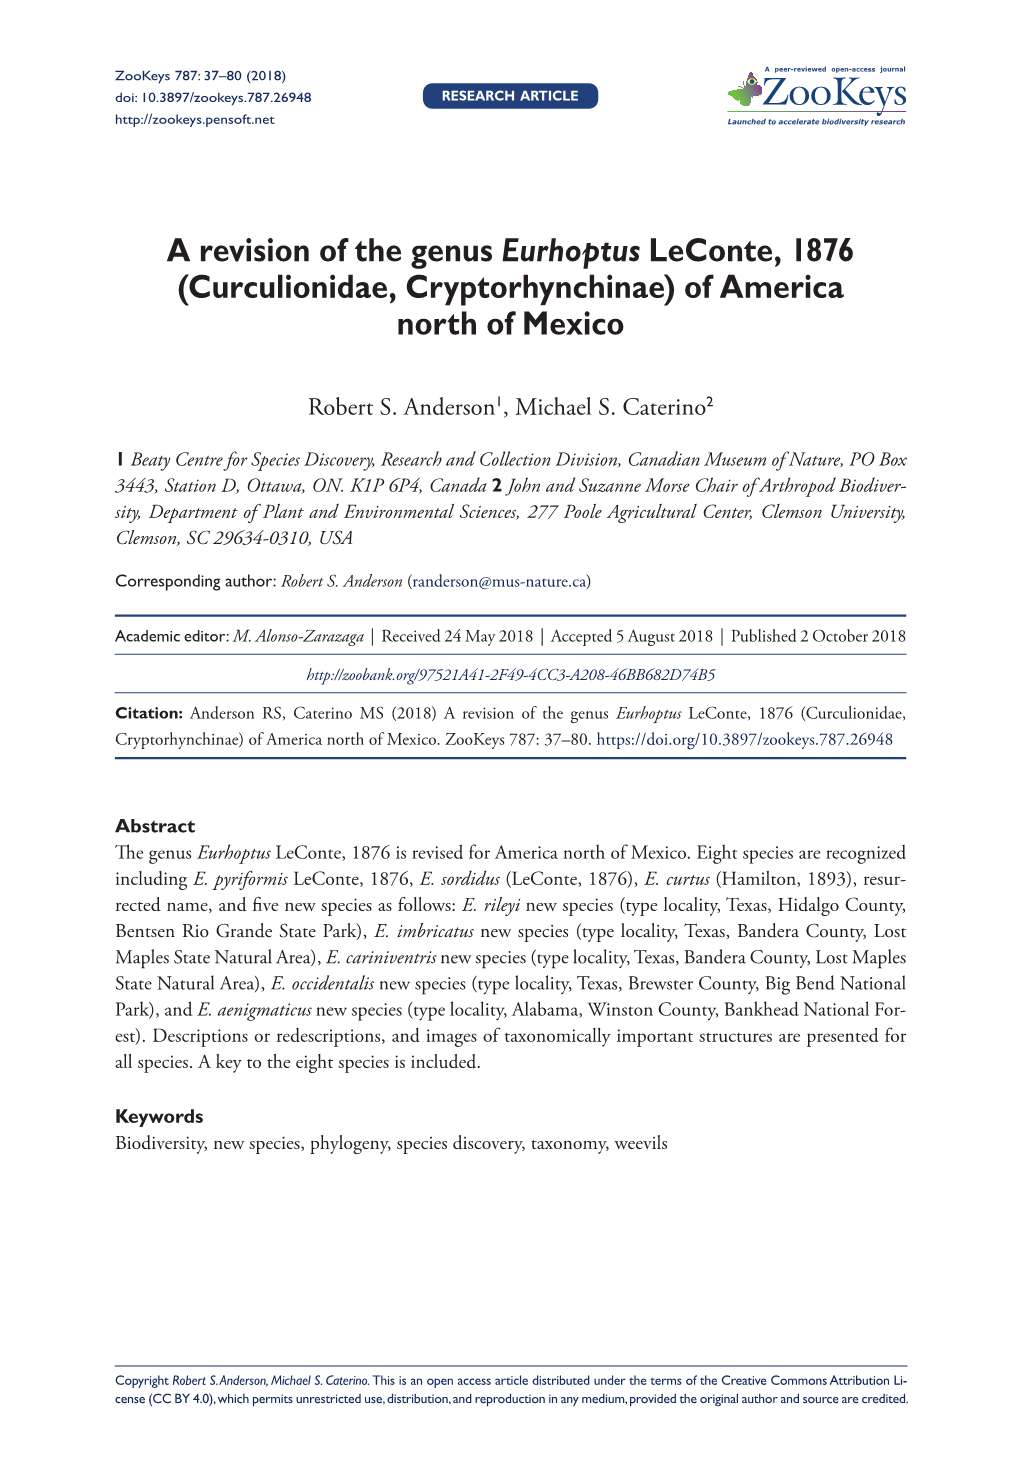 A Revision of the Genus Eurhoptus Leconte, 1876 (Curculionidae, Cryptorhynchinae) of America North of Mexico